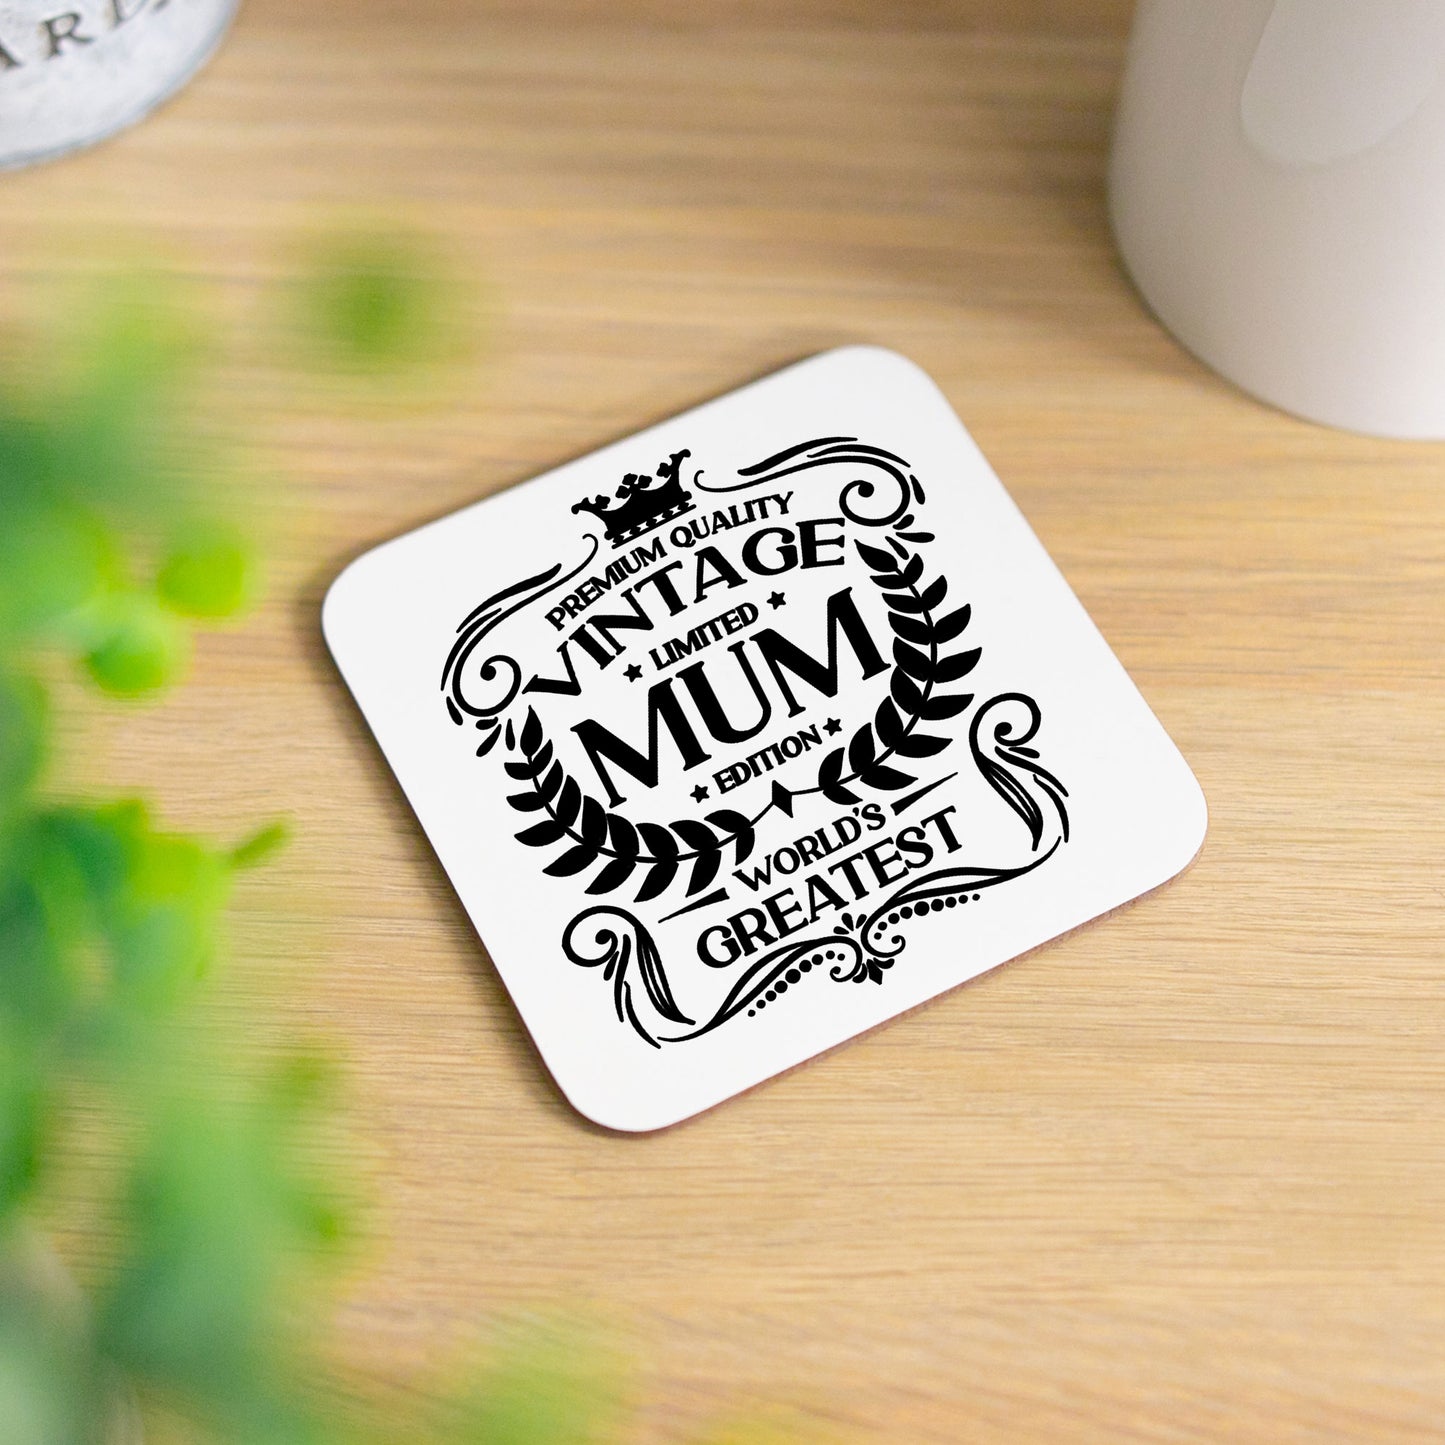 Vintage World's Greatest Mum Engraved Wine Glass Gift  - Always Looking Good - Glass & Printed Coaster  